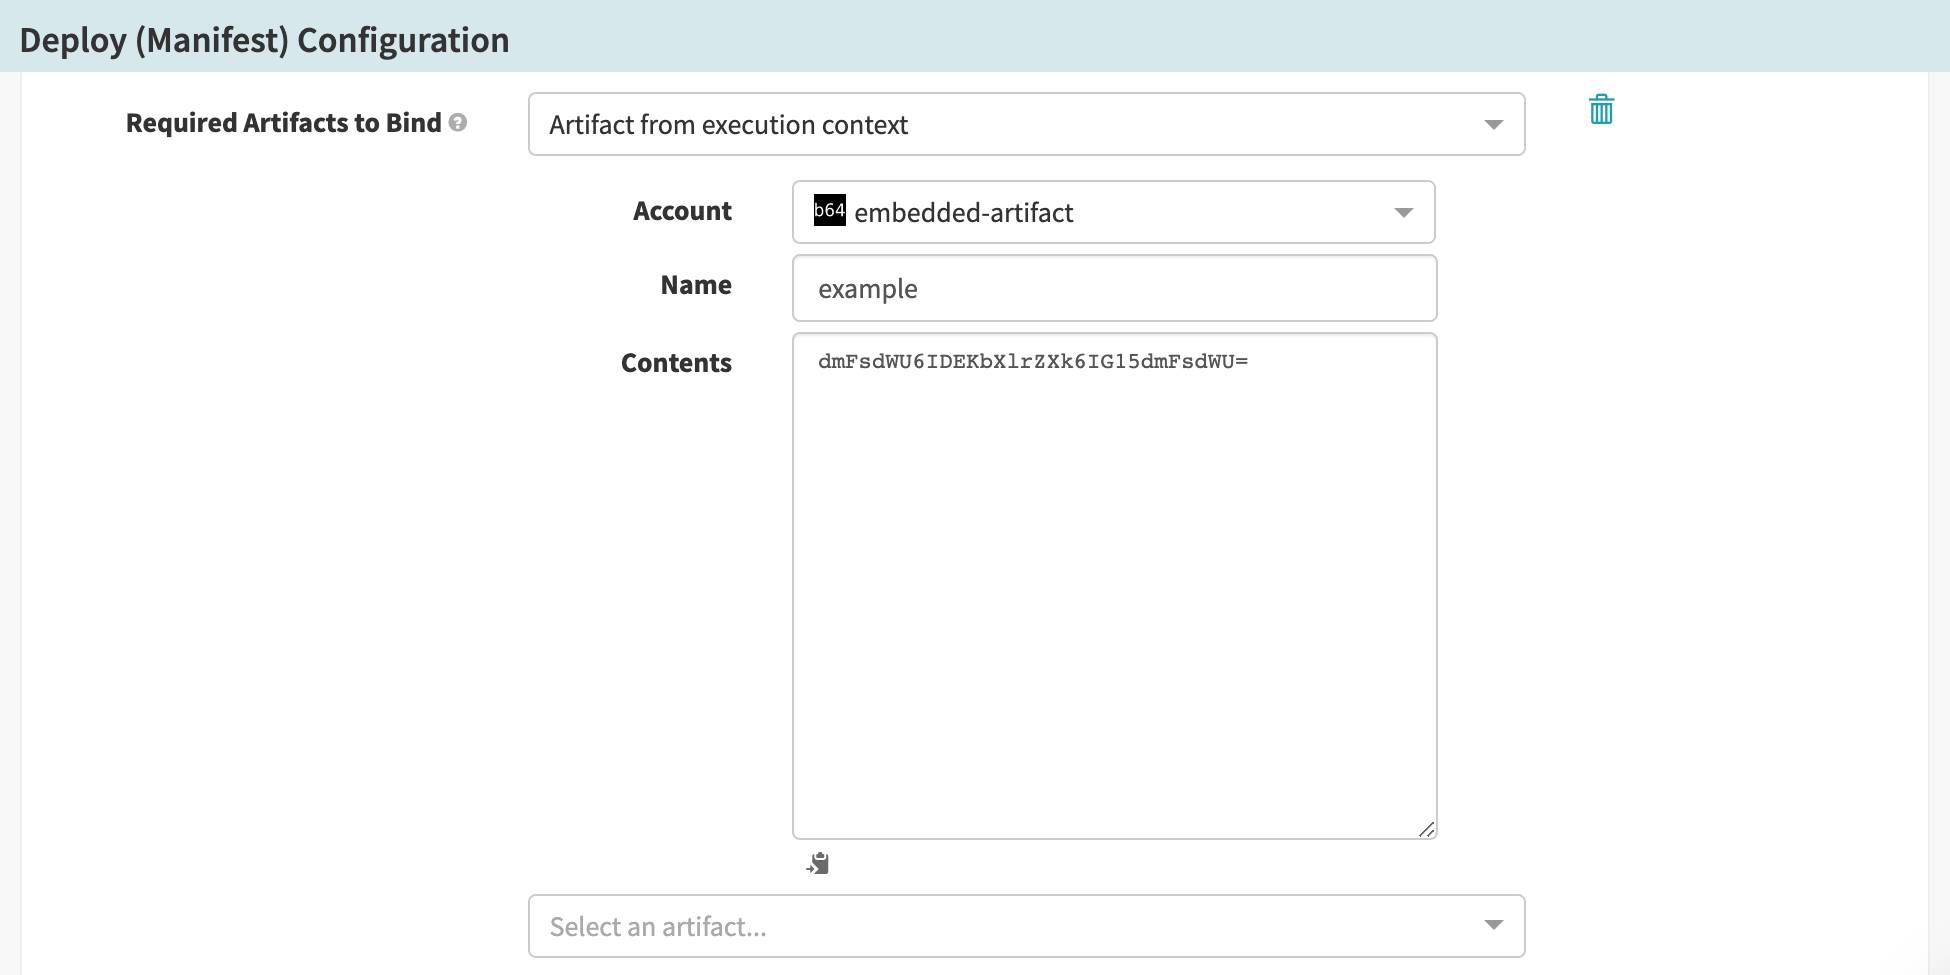 Configuring a Deploy (Manifest) stage to use an embedded artifact.